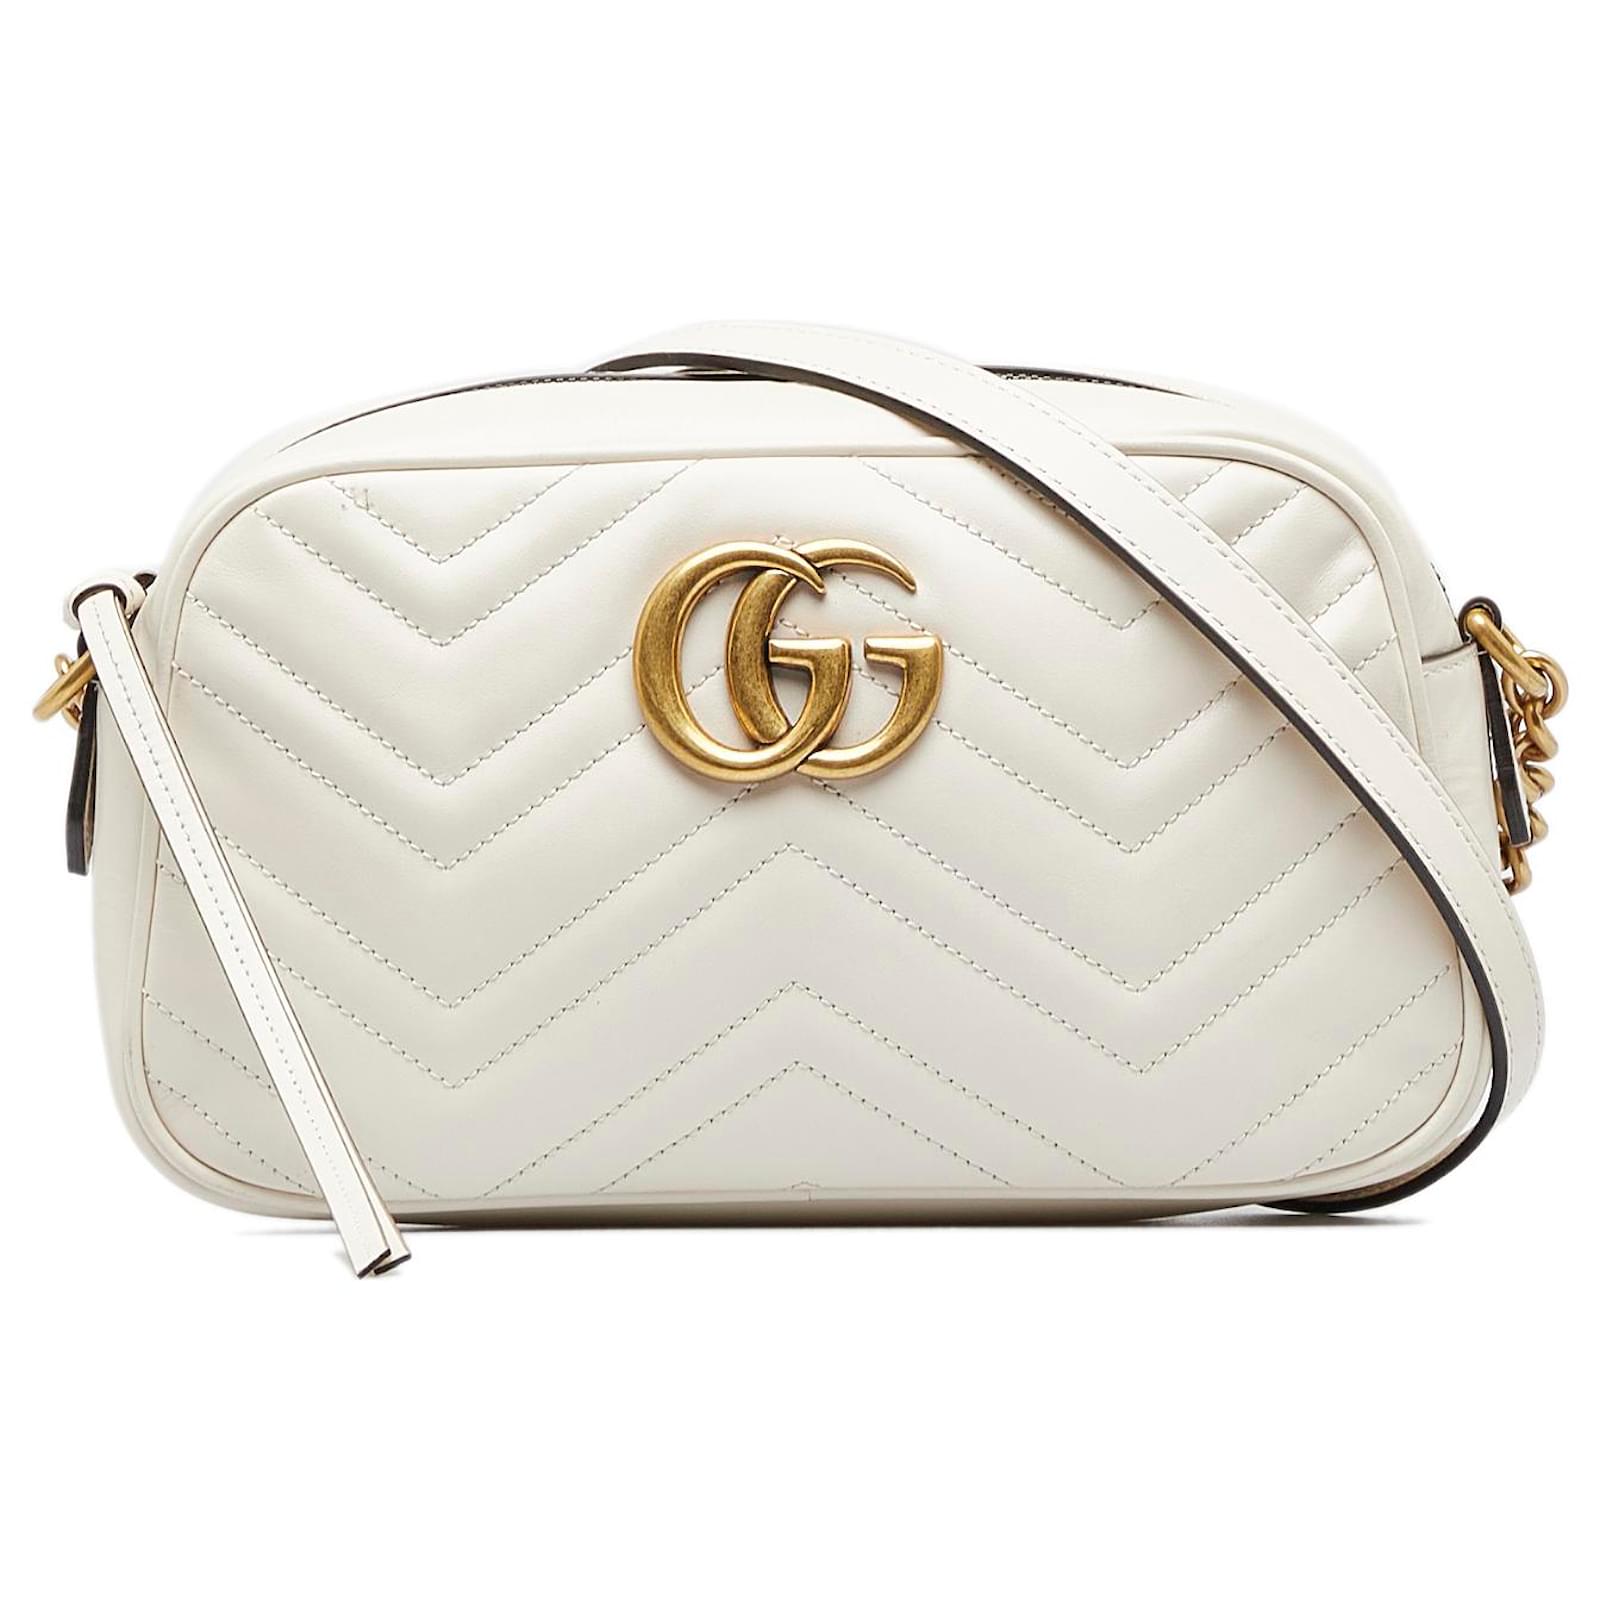 GG Marmont Small Leather Shoulder Bag in White - Gucci